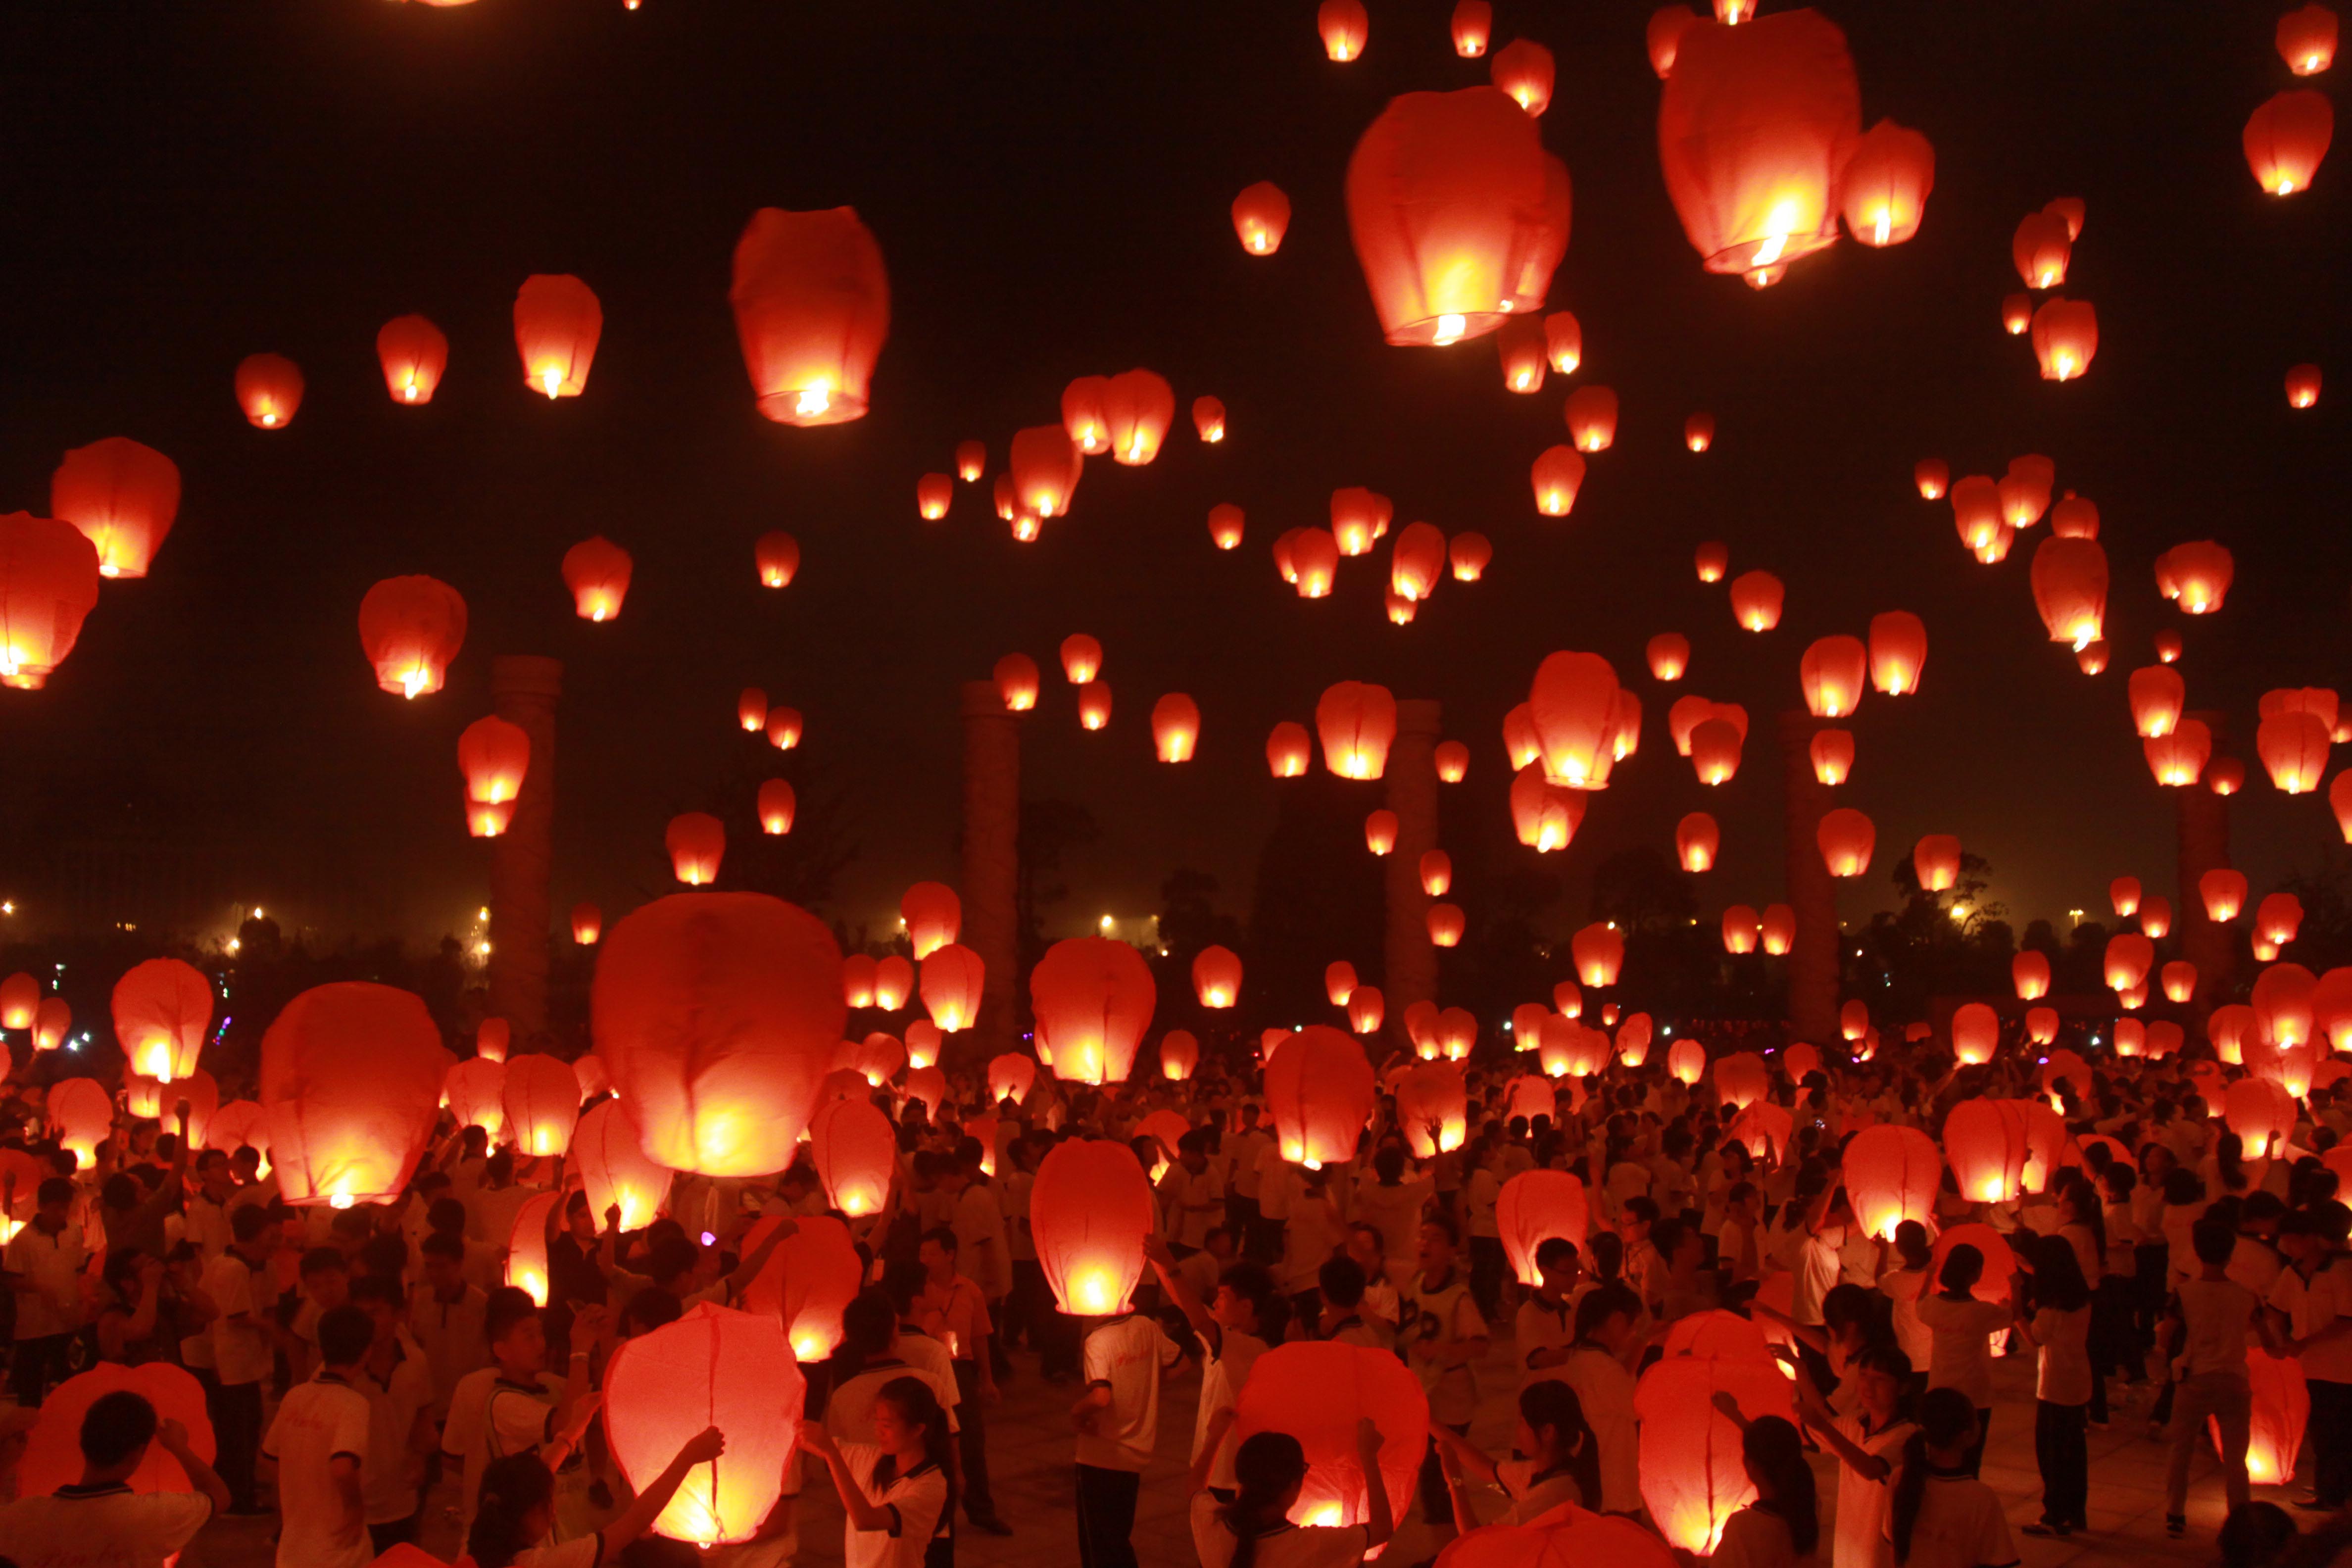 Hong Kong Midautumn festival in China Pictures CBS News